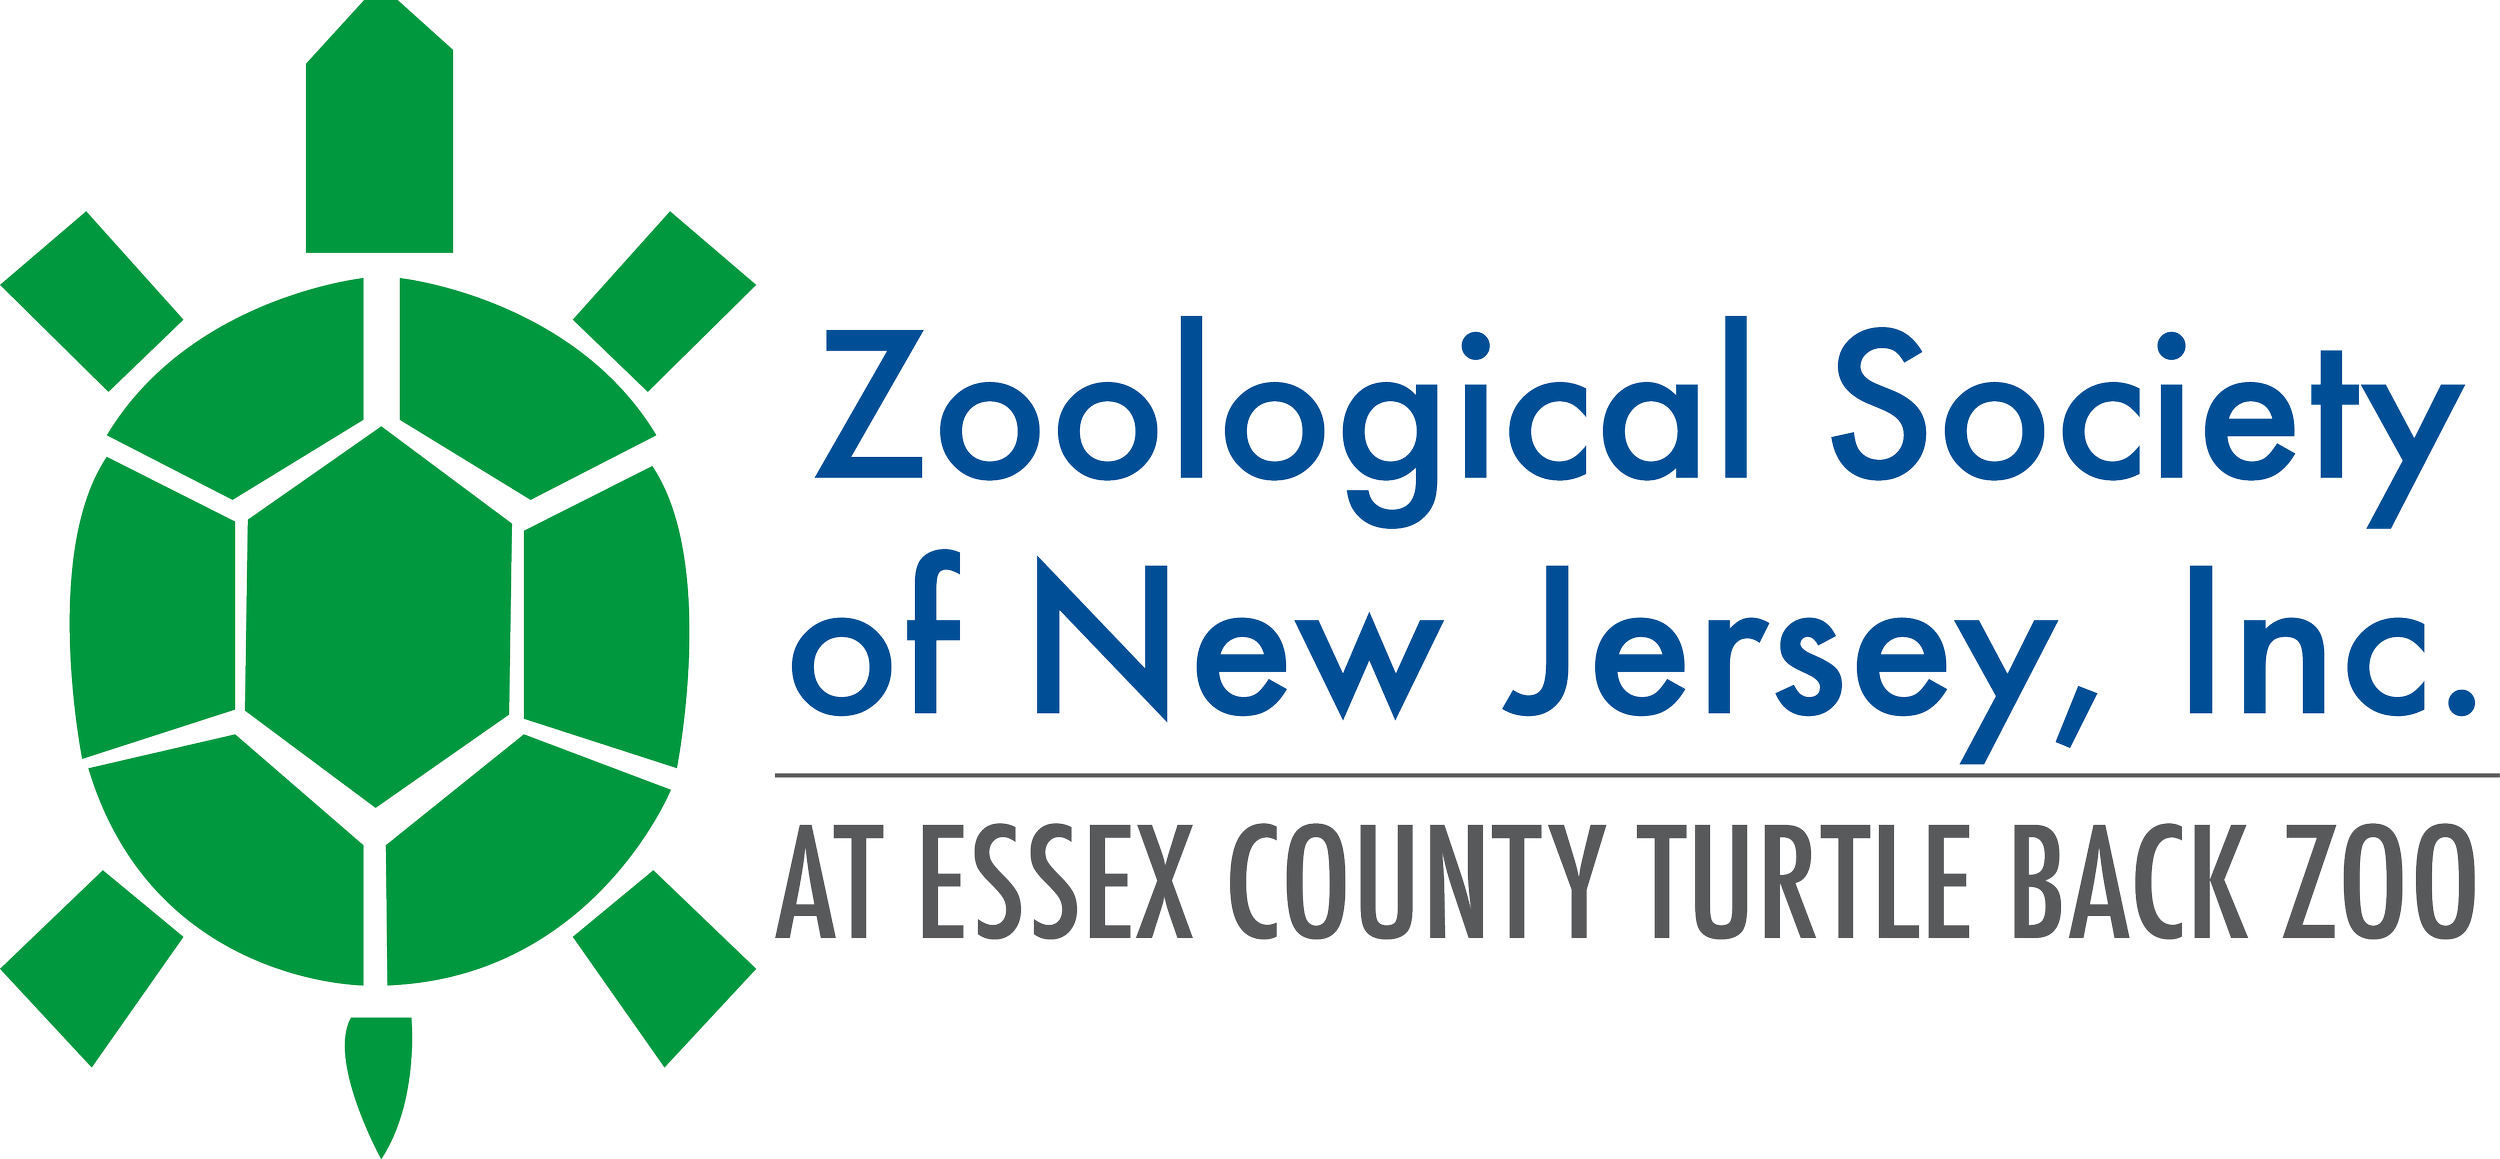 Zoological Society of New Jersey, Inc.